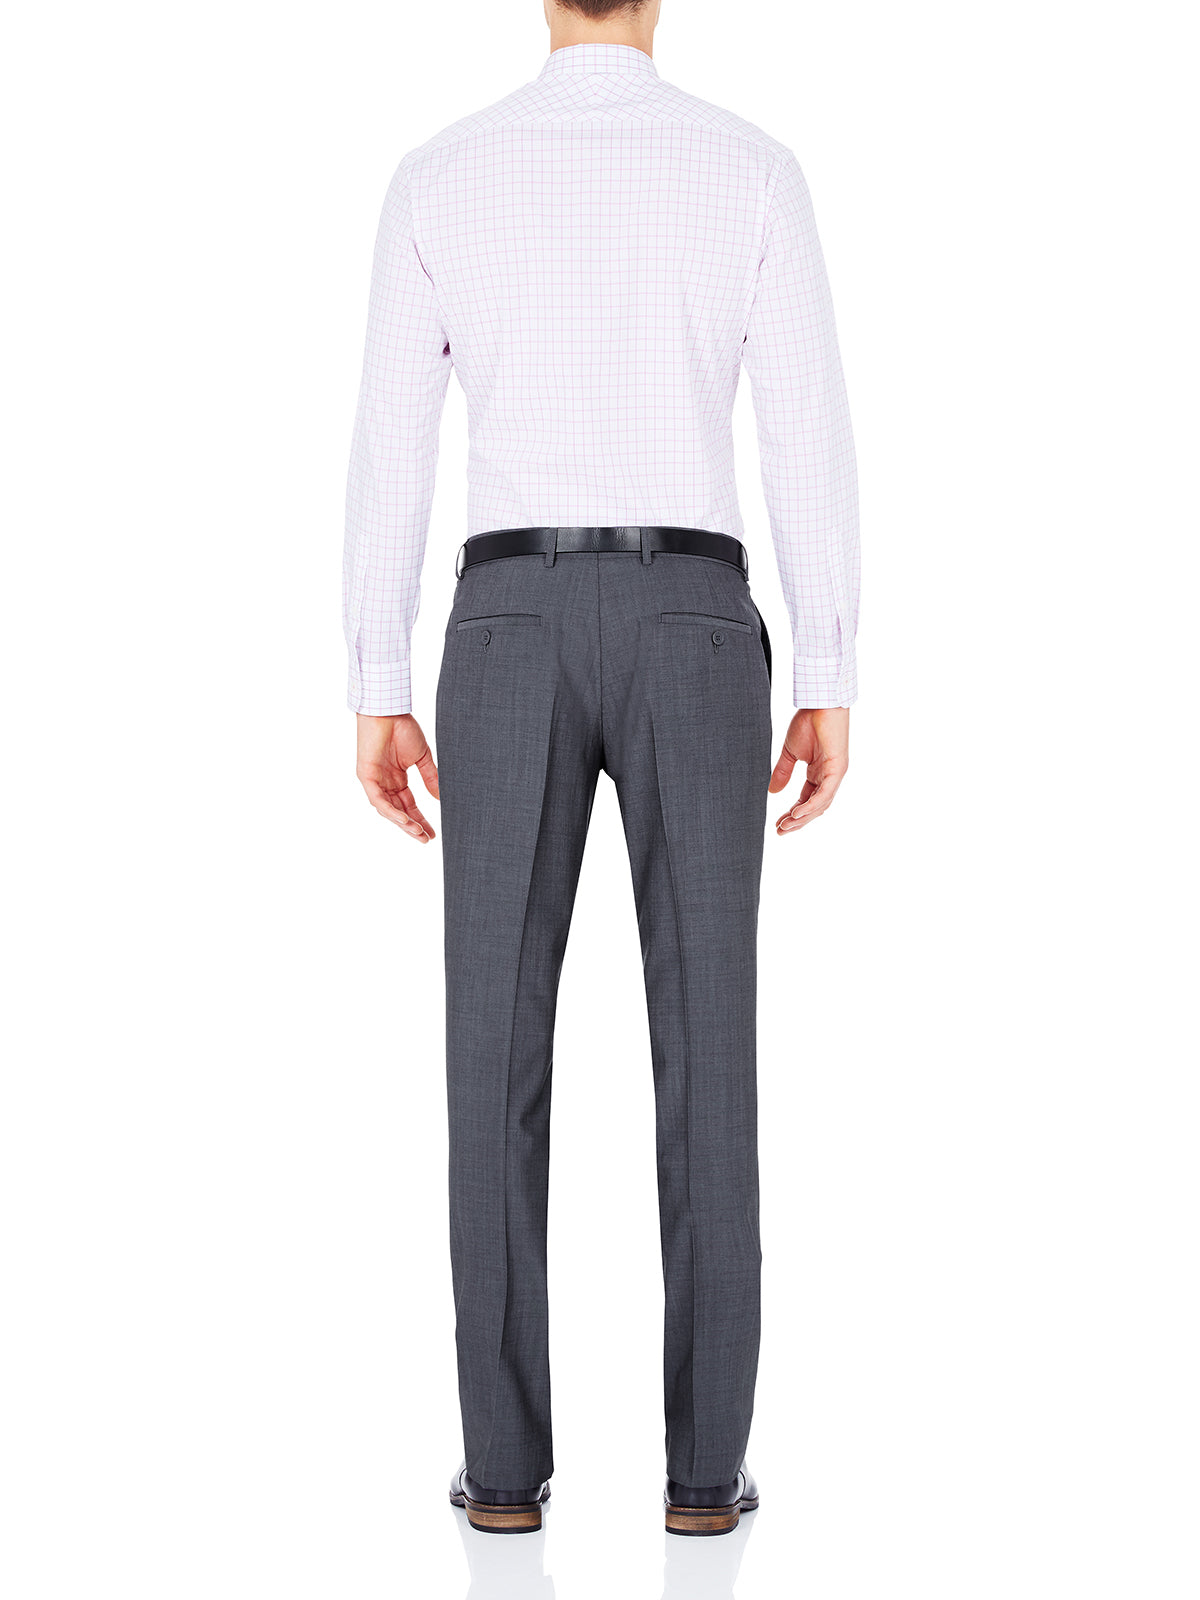 T22 WOOL SUIT TROUSERS